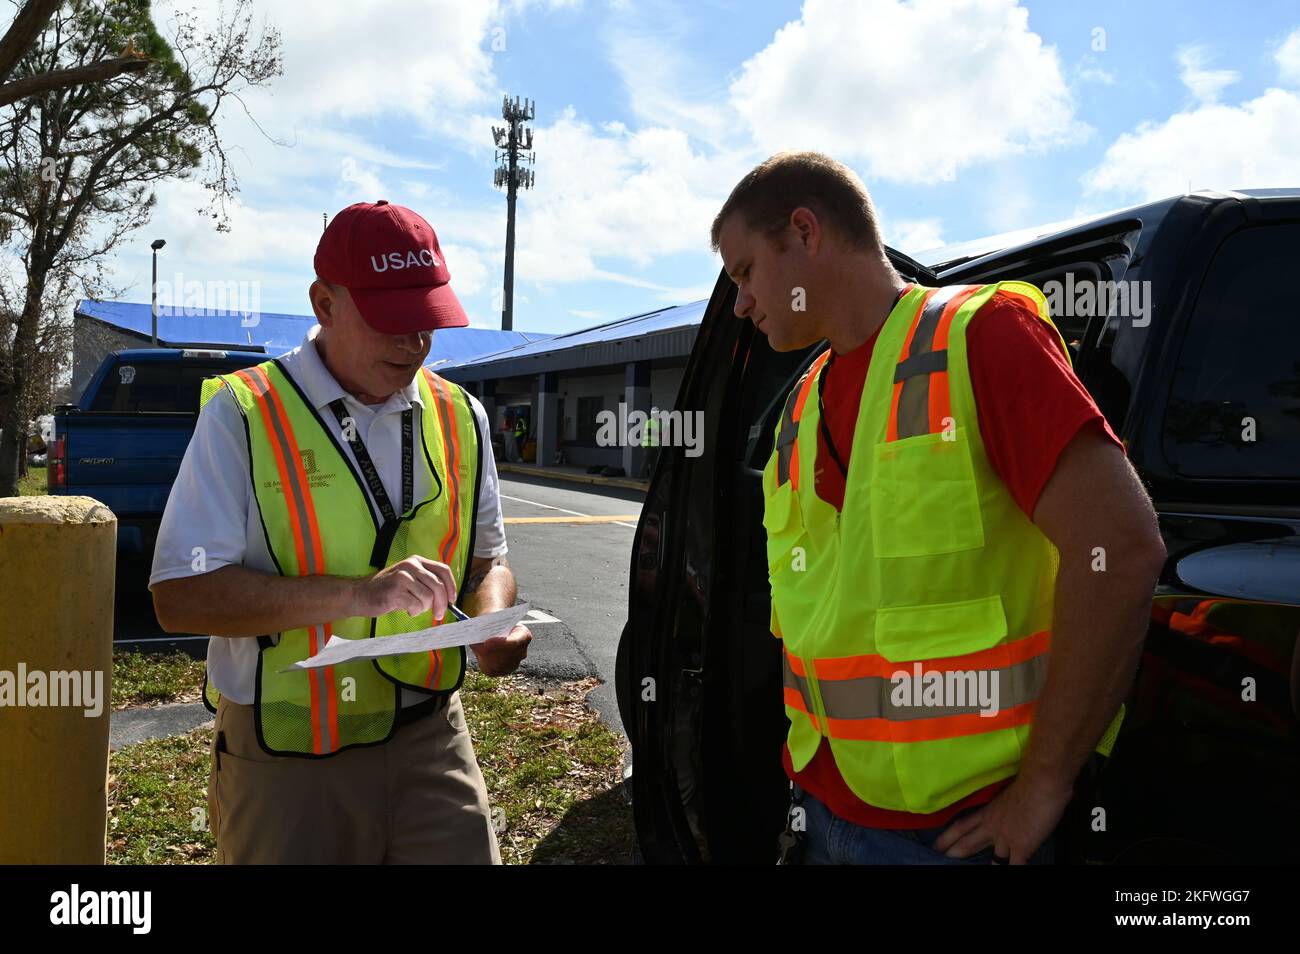 U.S. Army Corps of Engineers employees Allen Roos, left, and Tom Spencer, discusses a site assessment of a critical infrastructure at a public school in Fort Myers, Florida, Oct. 11. There are currently more than 280 USACE employees deployed to Florida that are actively supporting FEMA and the state’s recovery operations. Stock Photo